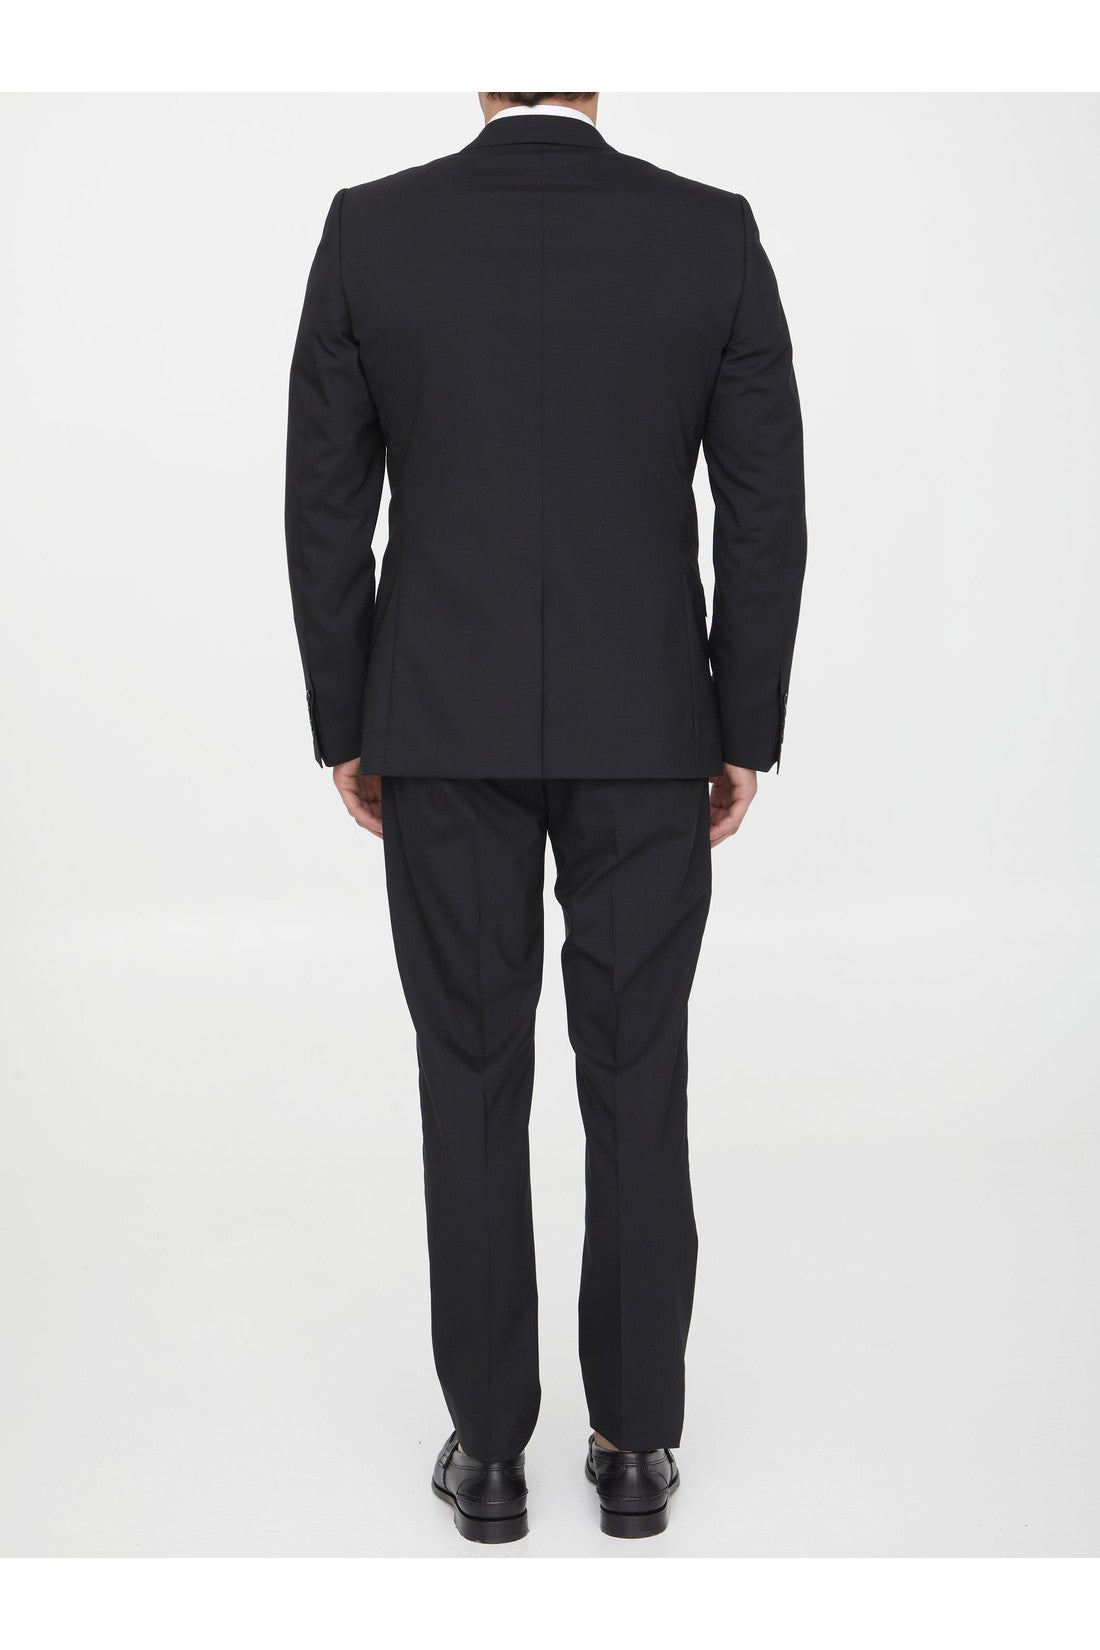 Two-piece suit in black wool